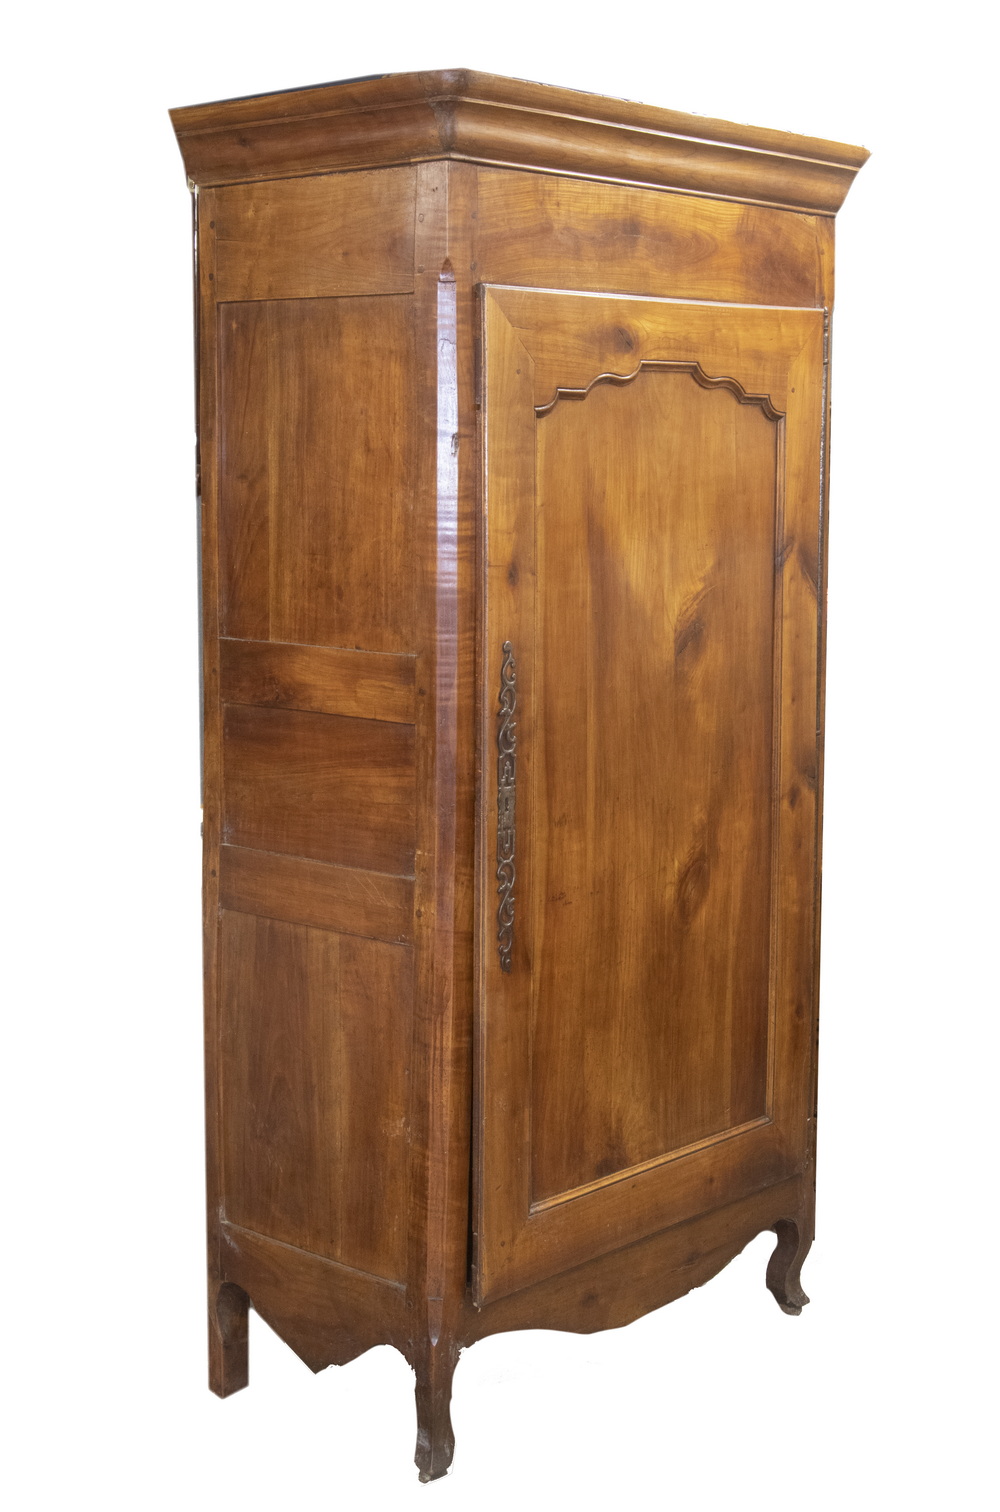 FRENCH PROVINCIAL ARMOIRE 18th